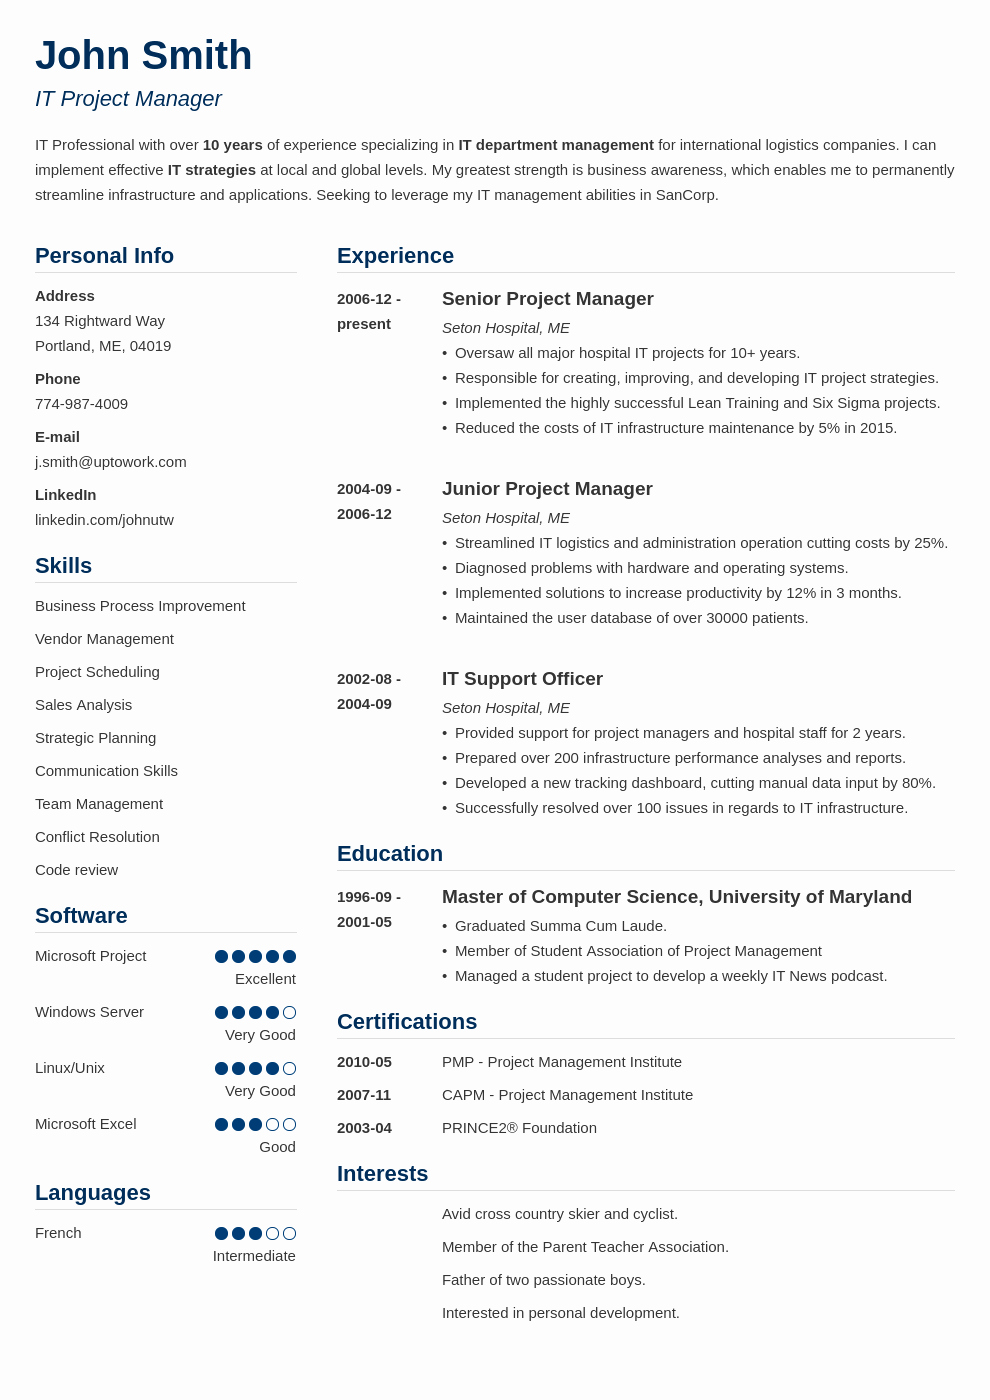 Where to Find Resume Templates Lovely 20 Resume Templates [download] Create Your Resume In 5